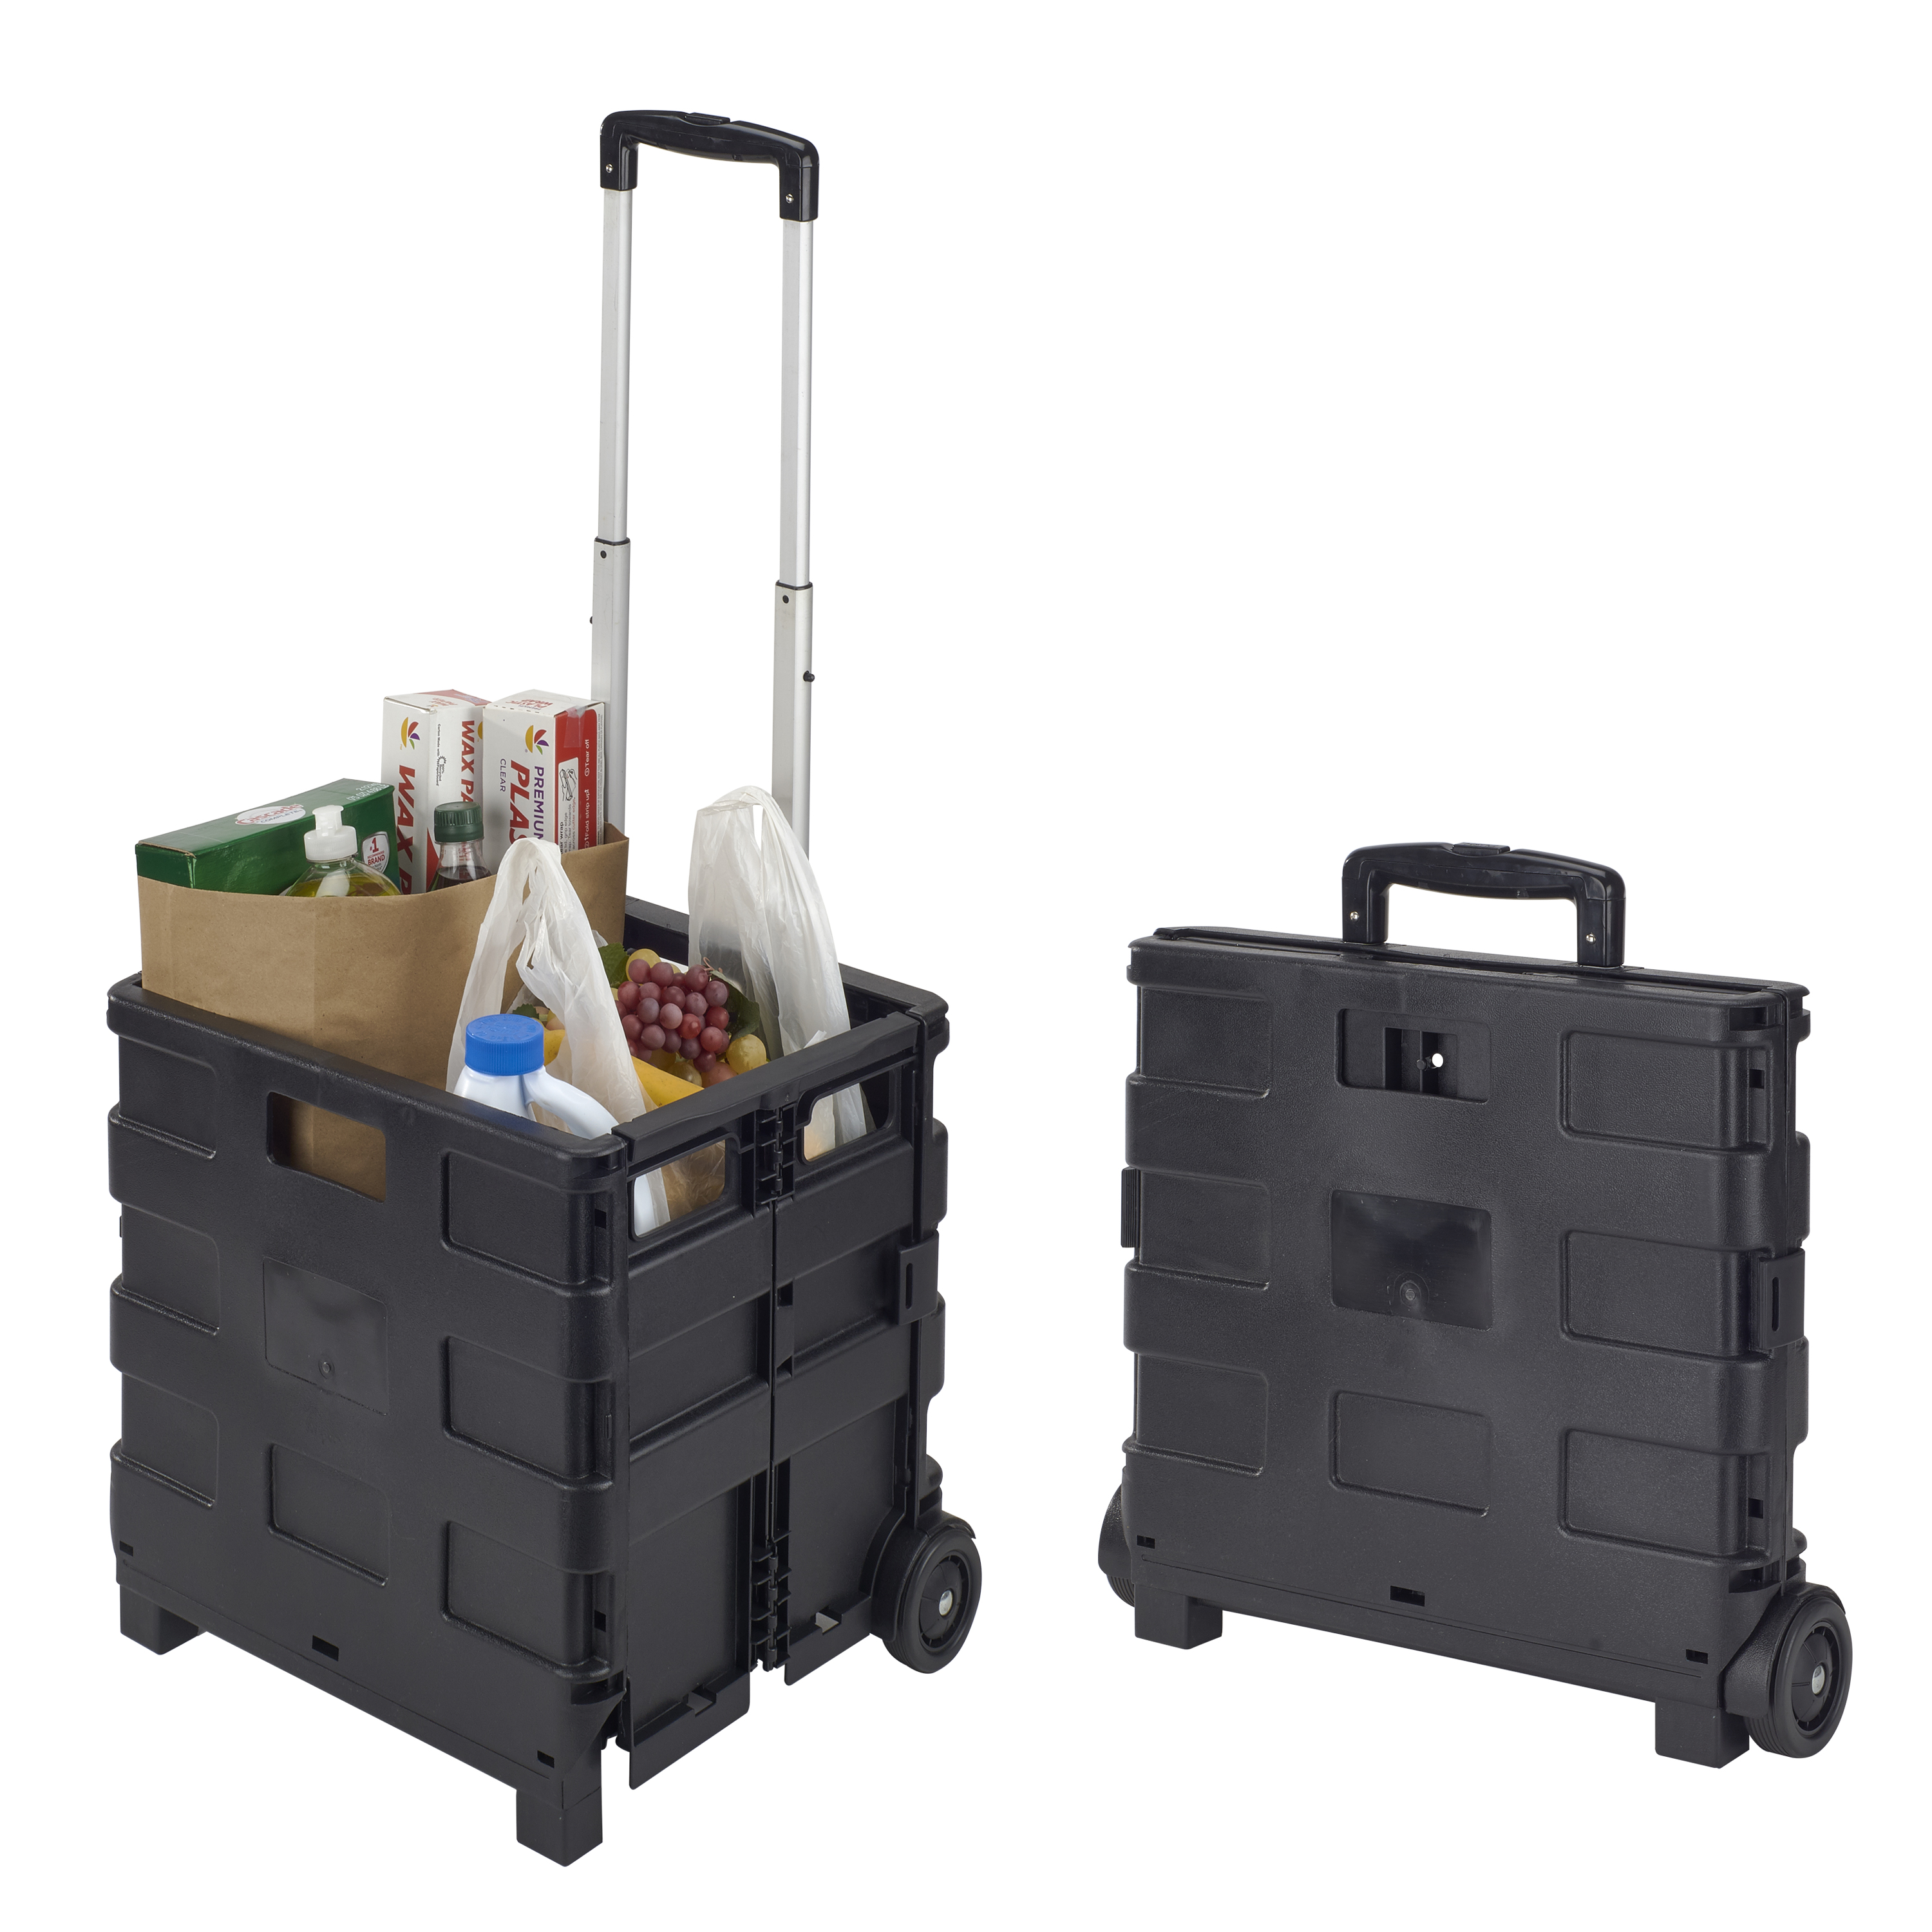 Simplify Tote Bin Collapsible Utility Cart, Plastic, Black, 15" x 13" x 14.2" - image 1 of 9